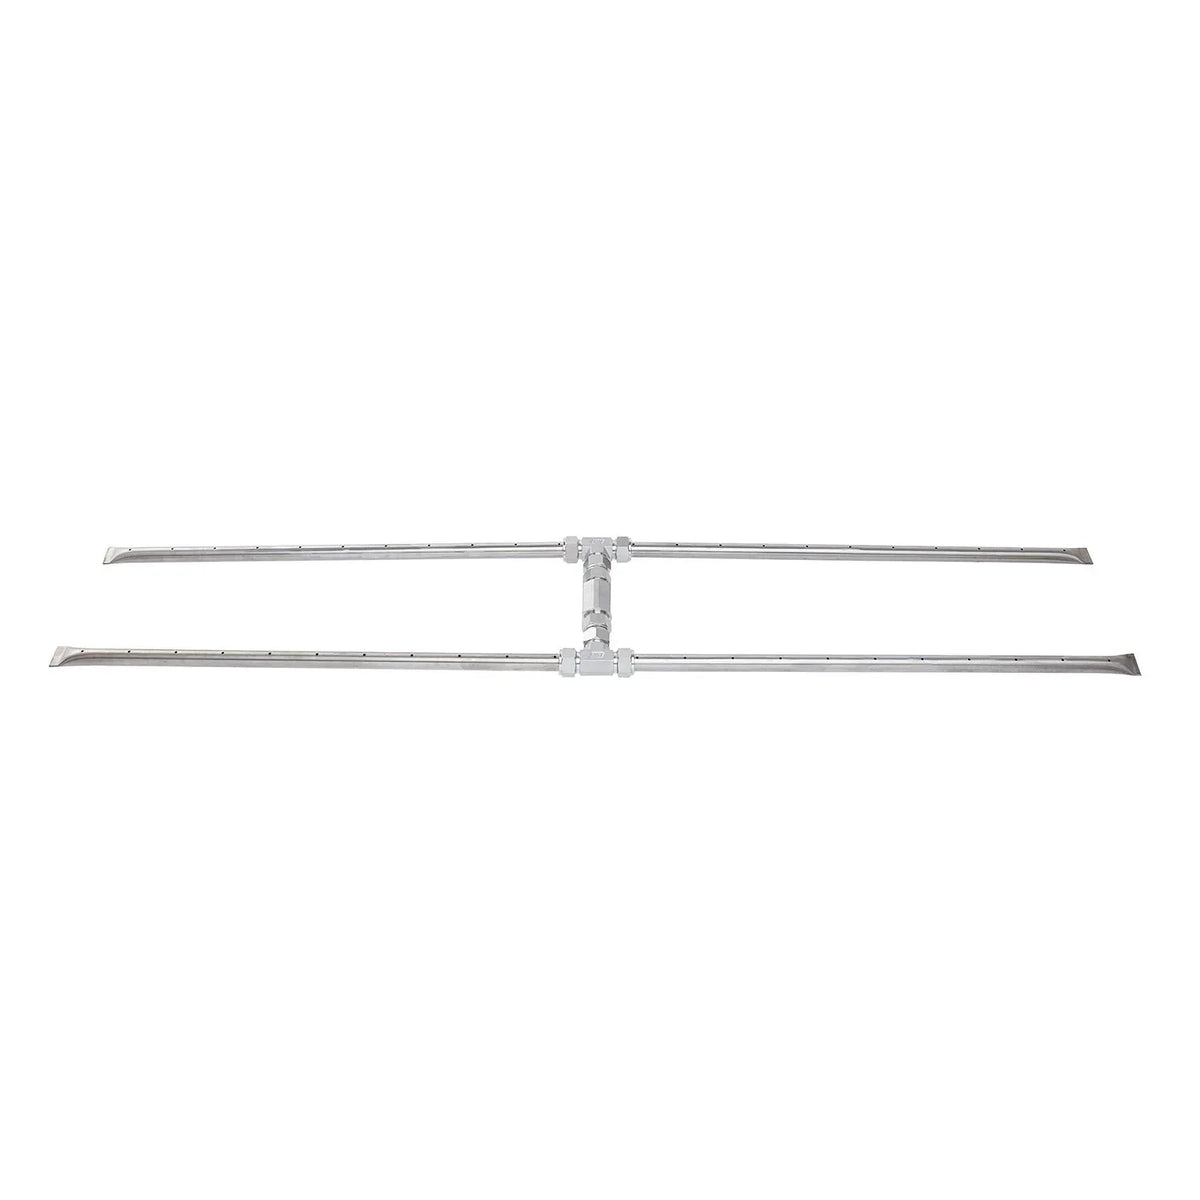 Fire By Design 24" x 4" RHB244NG Marine Grade Stainless Steel Retro H-Style Natural Gas Burner